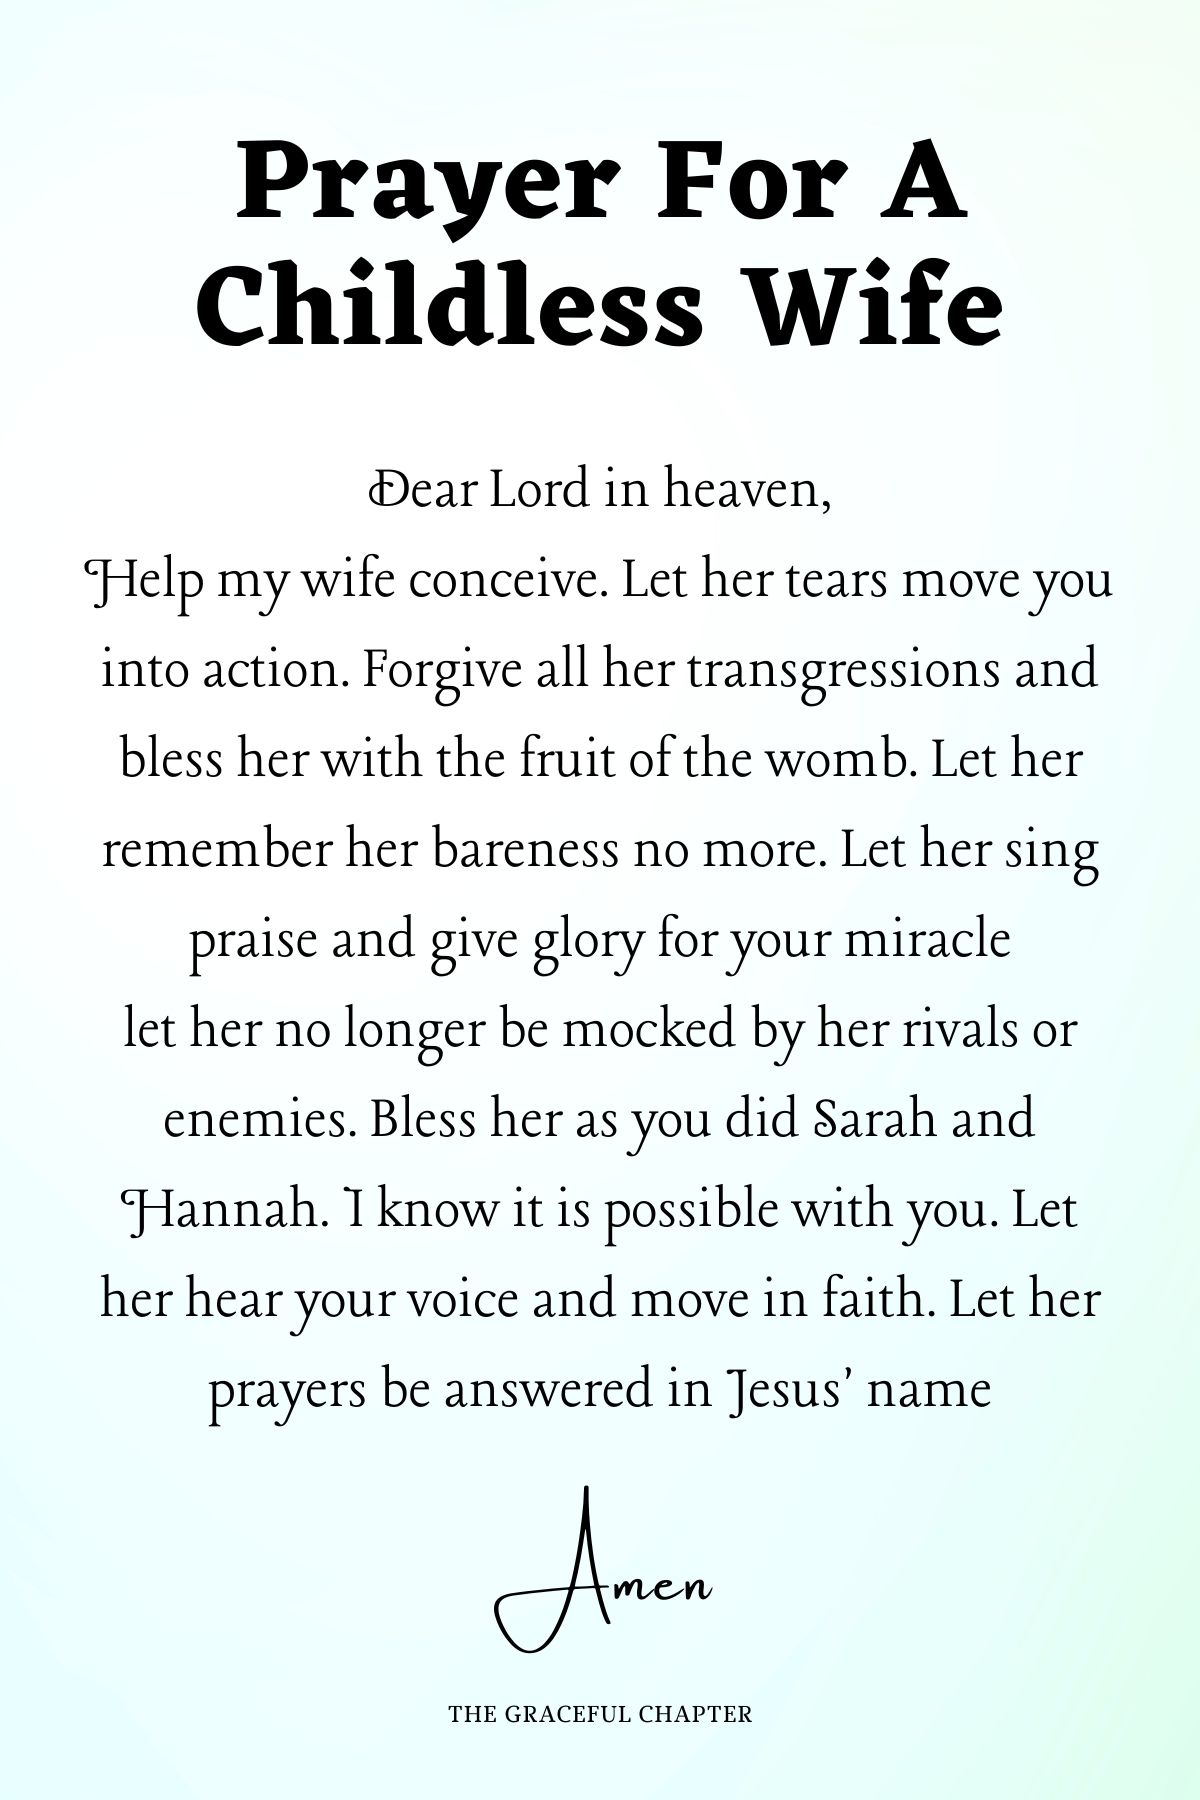 Prayer for a childless wife - Prayers For The Fruit Of The Womb